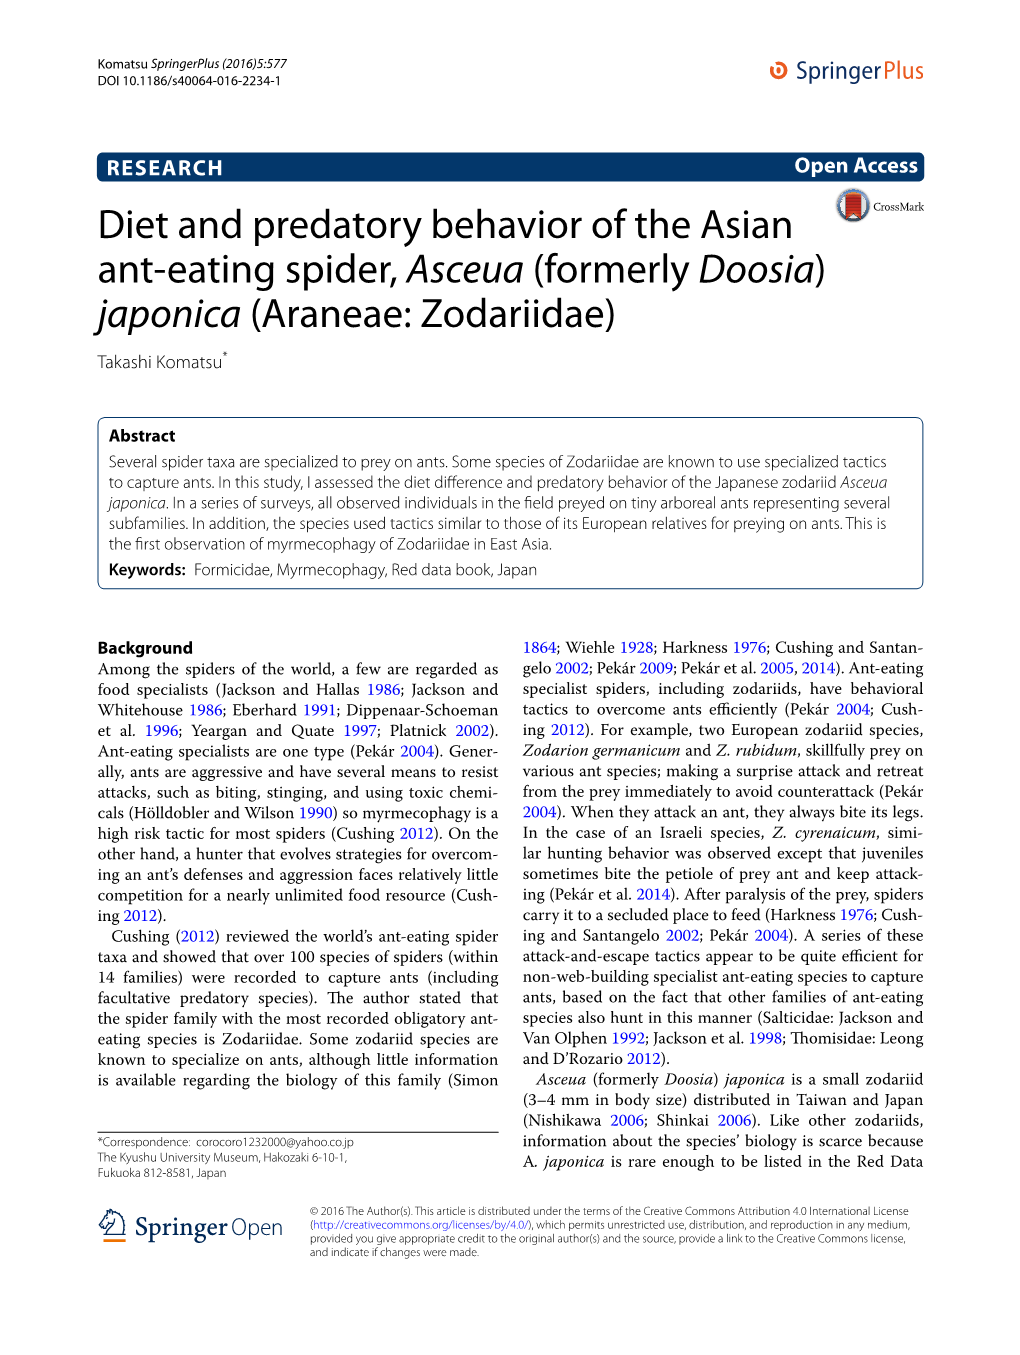 Diet and Predatory Behavior of the Asian Ant-Eating Spider, Asceua